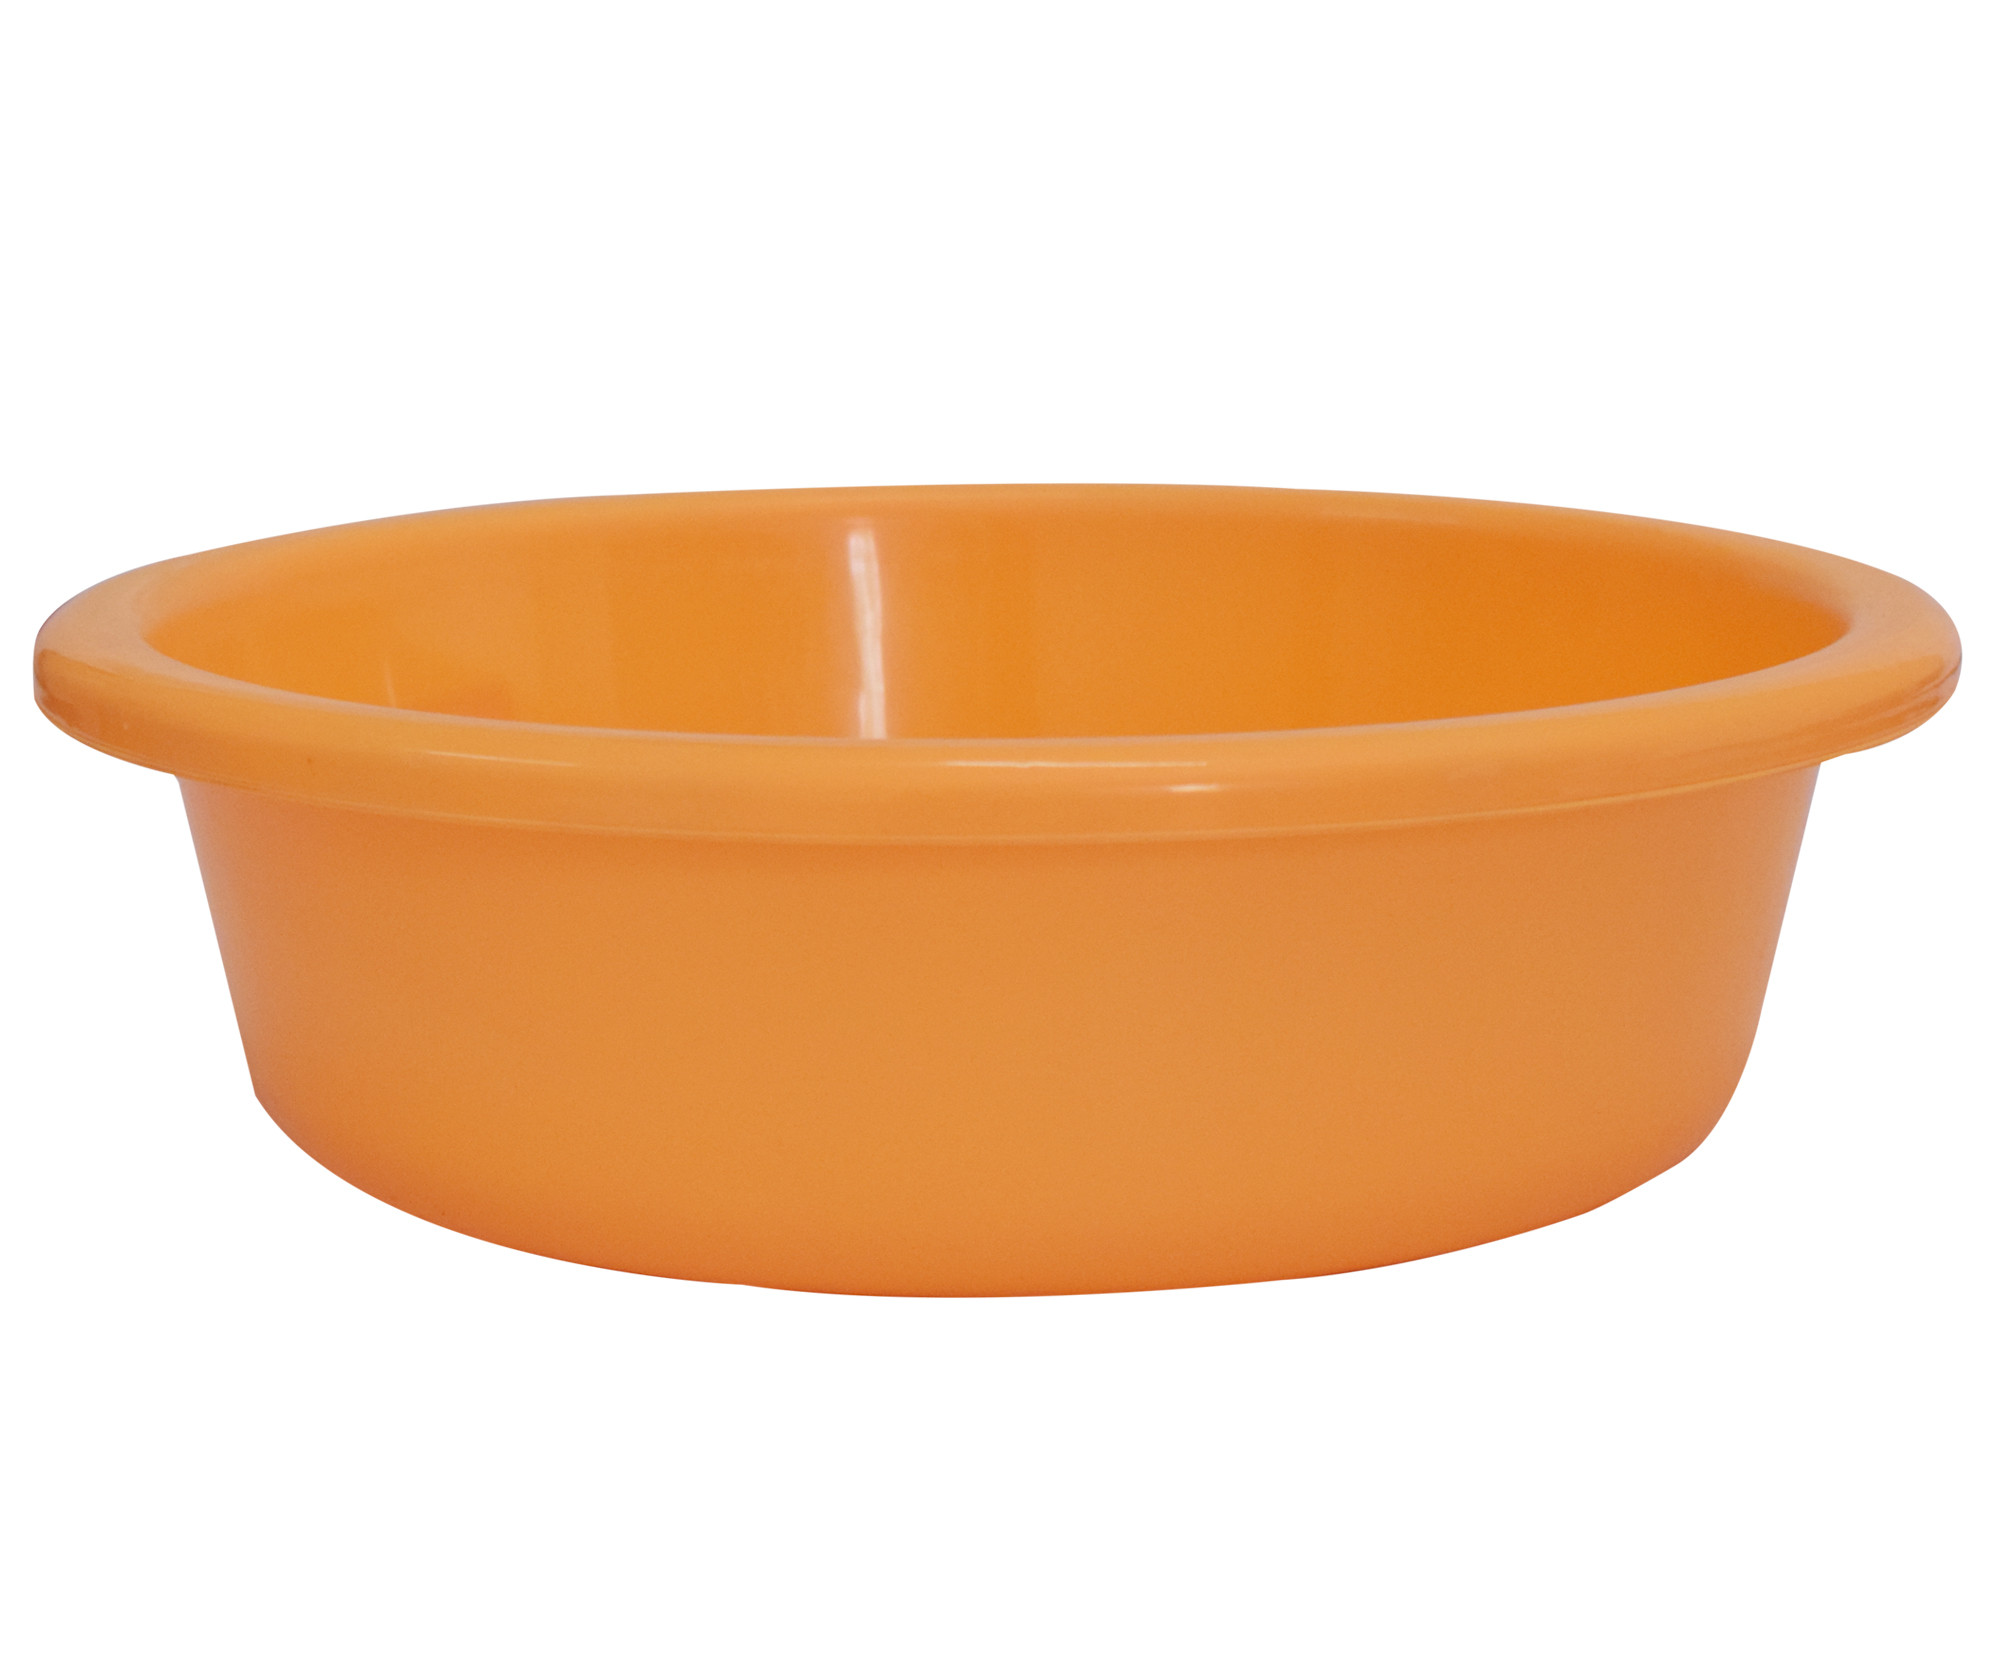 Kuber Industries Multiuses Unbreakable Plastic Knead Dough Basket/Basin Bowl For Home & Kitchen 6 Ltr- Pack of 2 (Yellow & White)